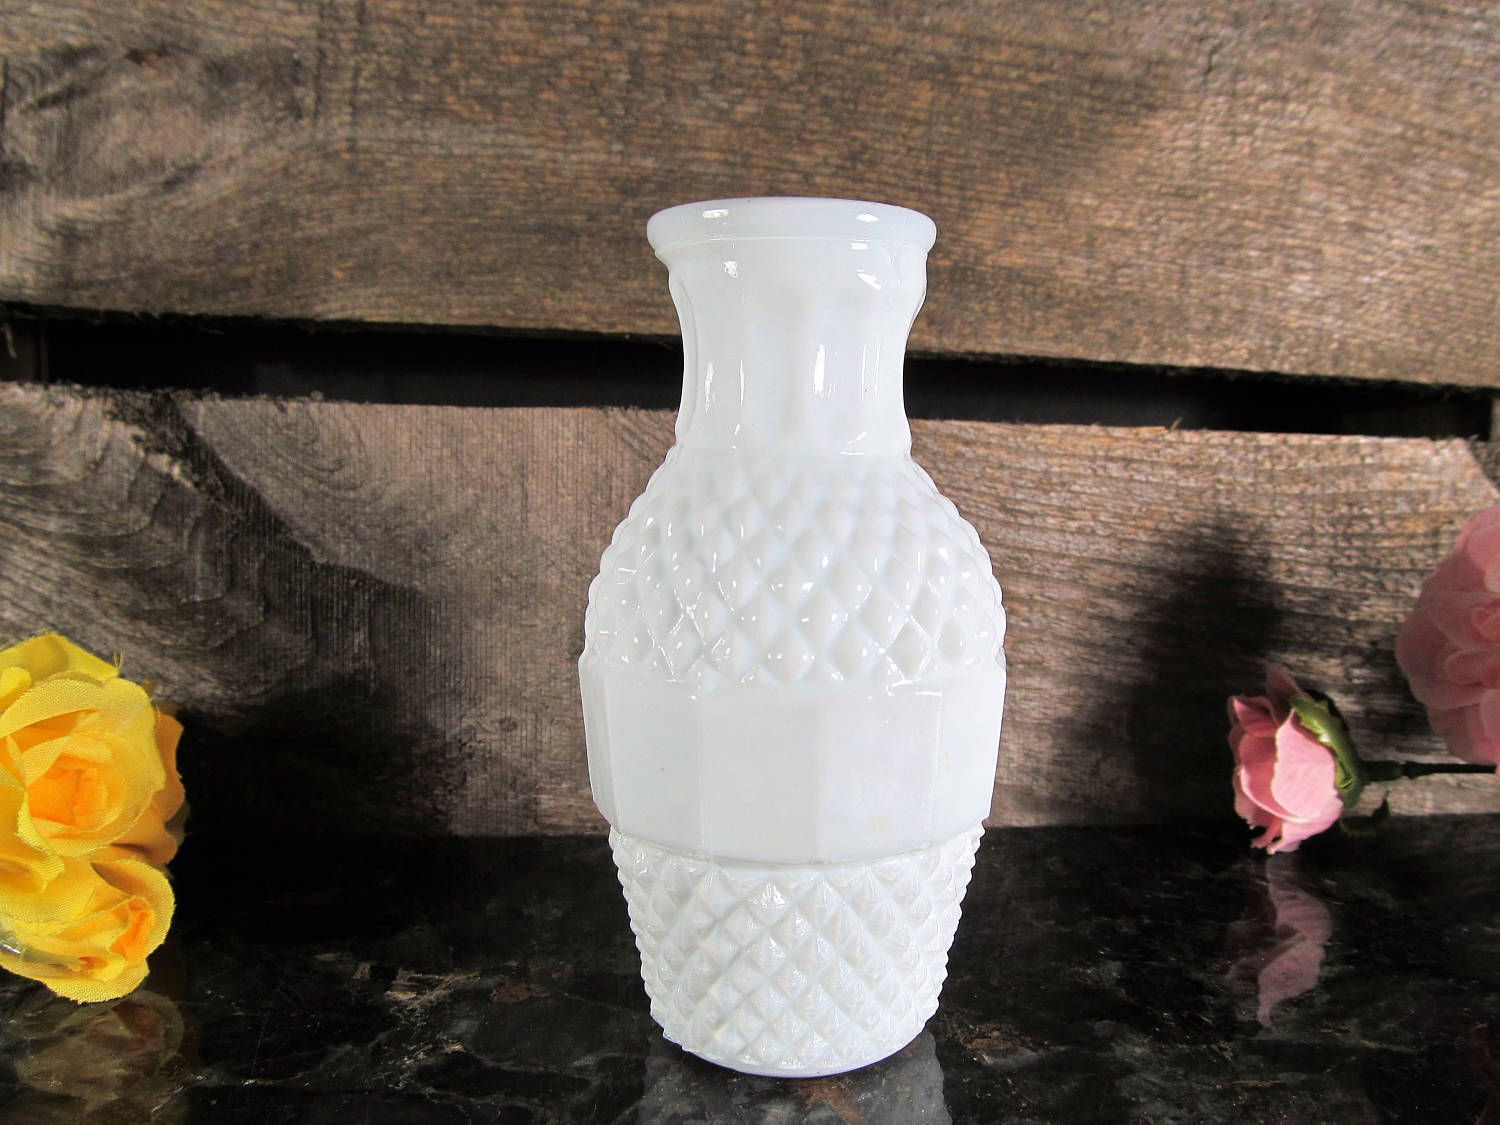 28 Ideal Miniature Glass Bud Vases 2024 free download miniature glass bud vases of small white milk glass bud vase miniature floral vase retro home in small white milk glass bud vase miniature floral vase retro home and office decor vintage far